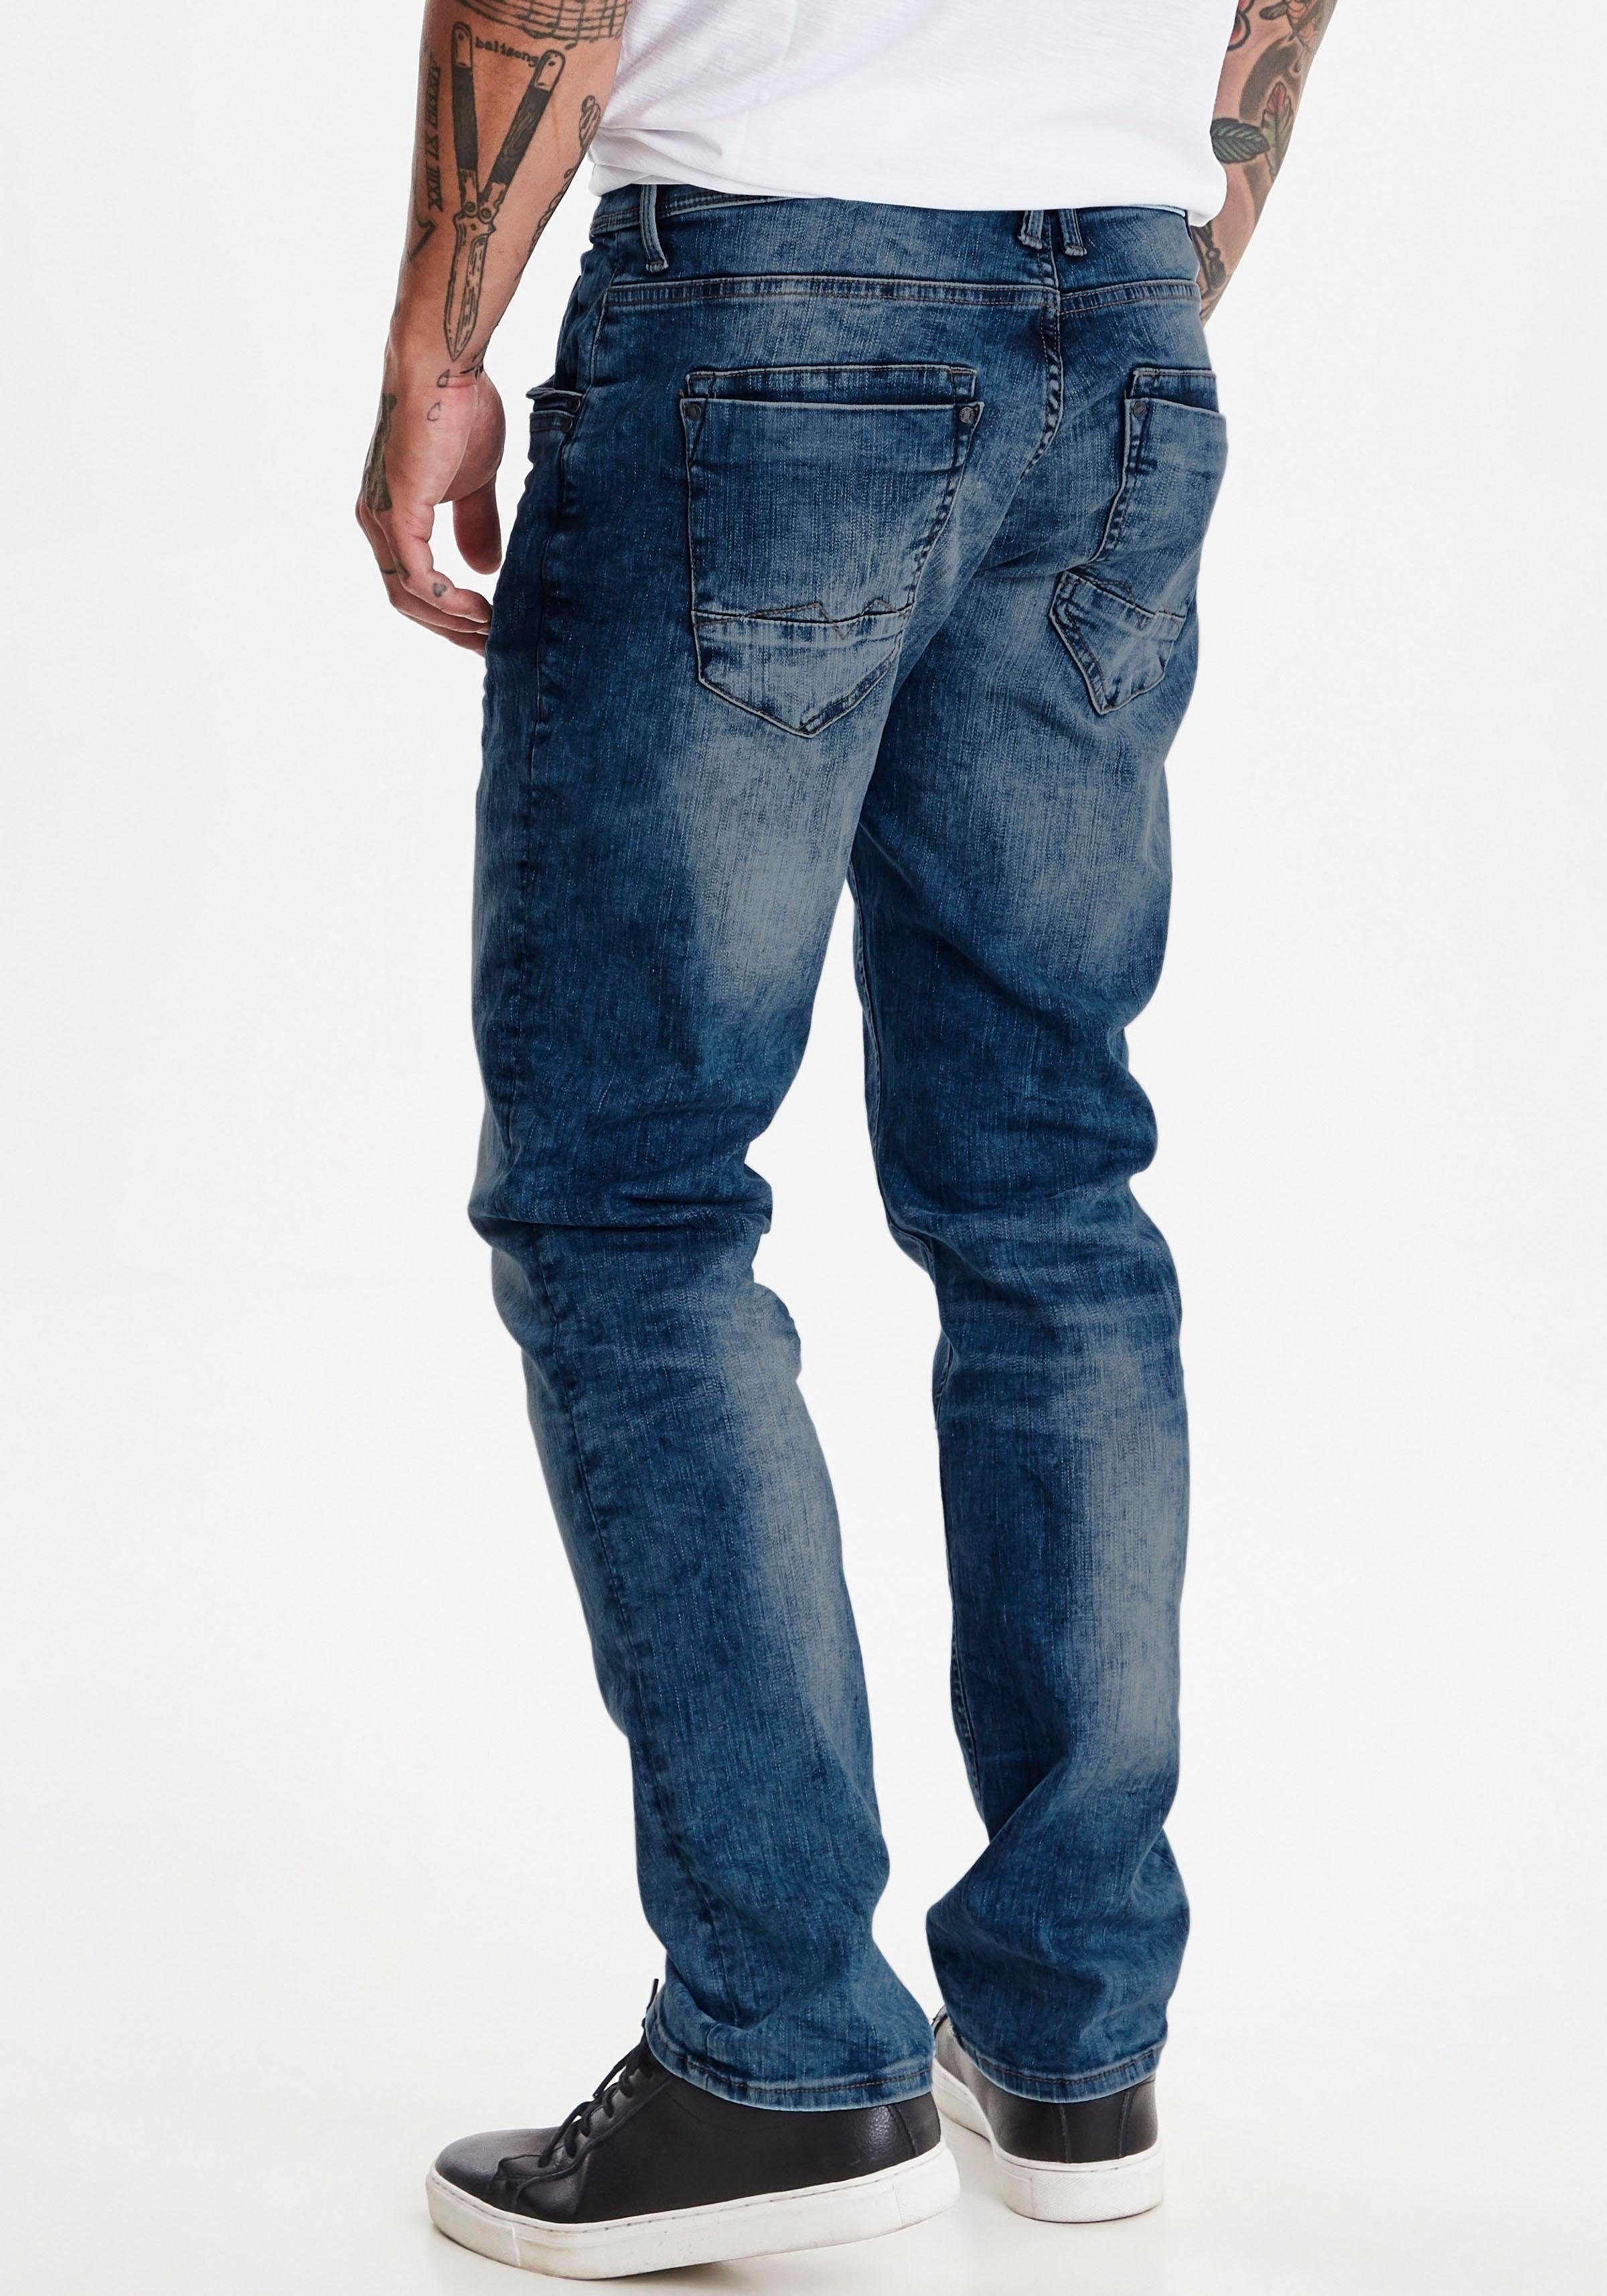 Blend Regular-fit-Jeans b.young BLIZZARD